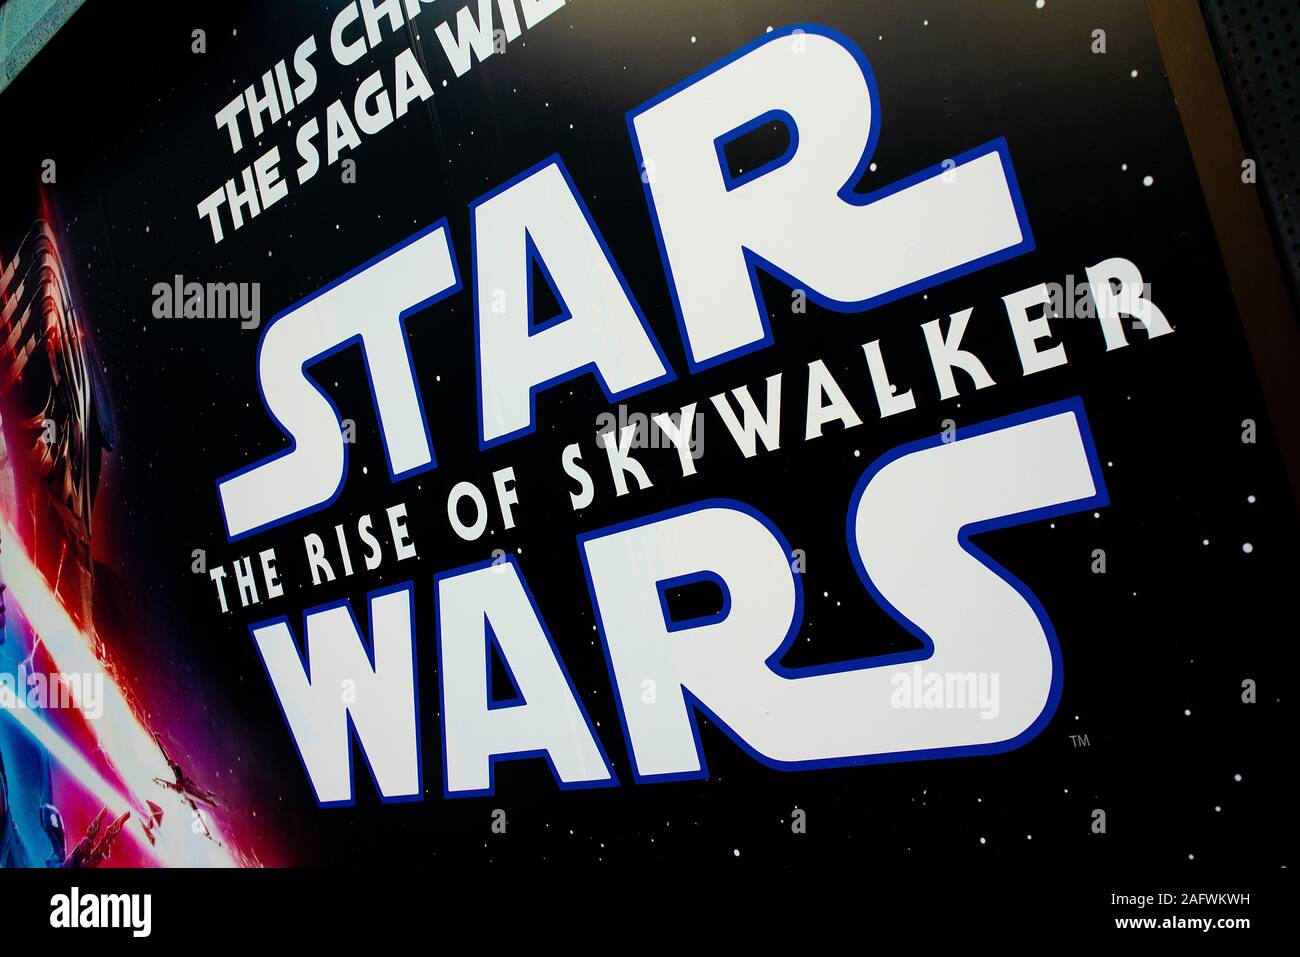 Part of the poster display outside the Empire cinema in Leicester Sq, London, advertising the Christmas release of Star Wars - The Rise Of Skywalker. Stock Photo